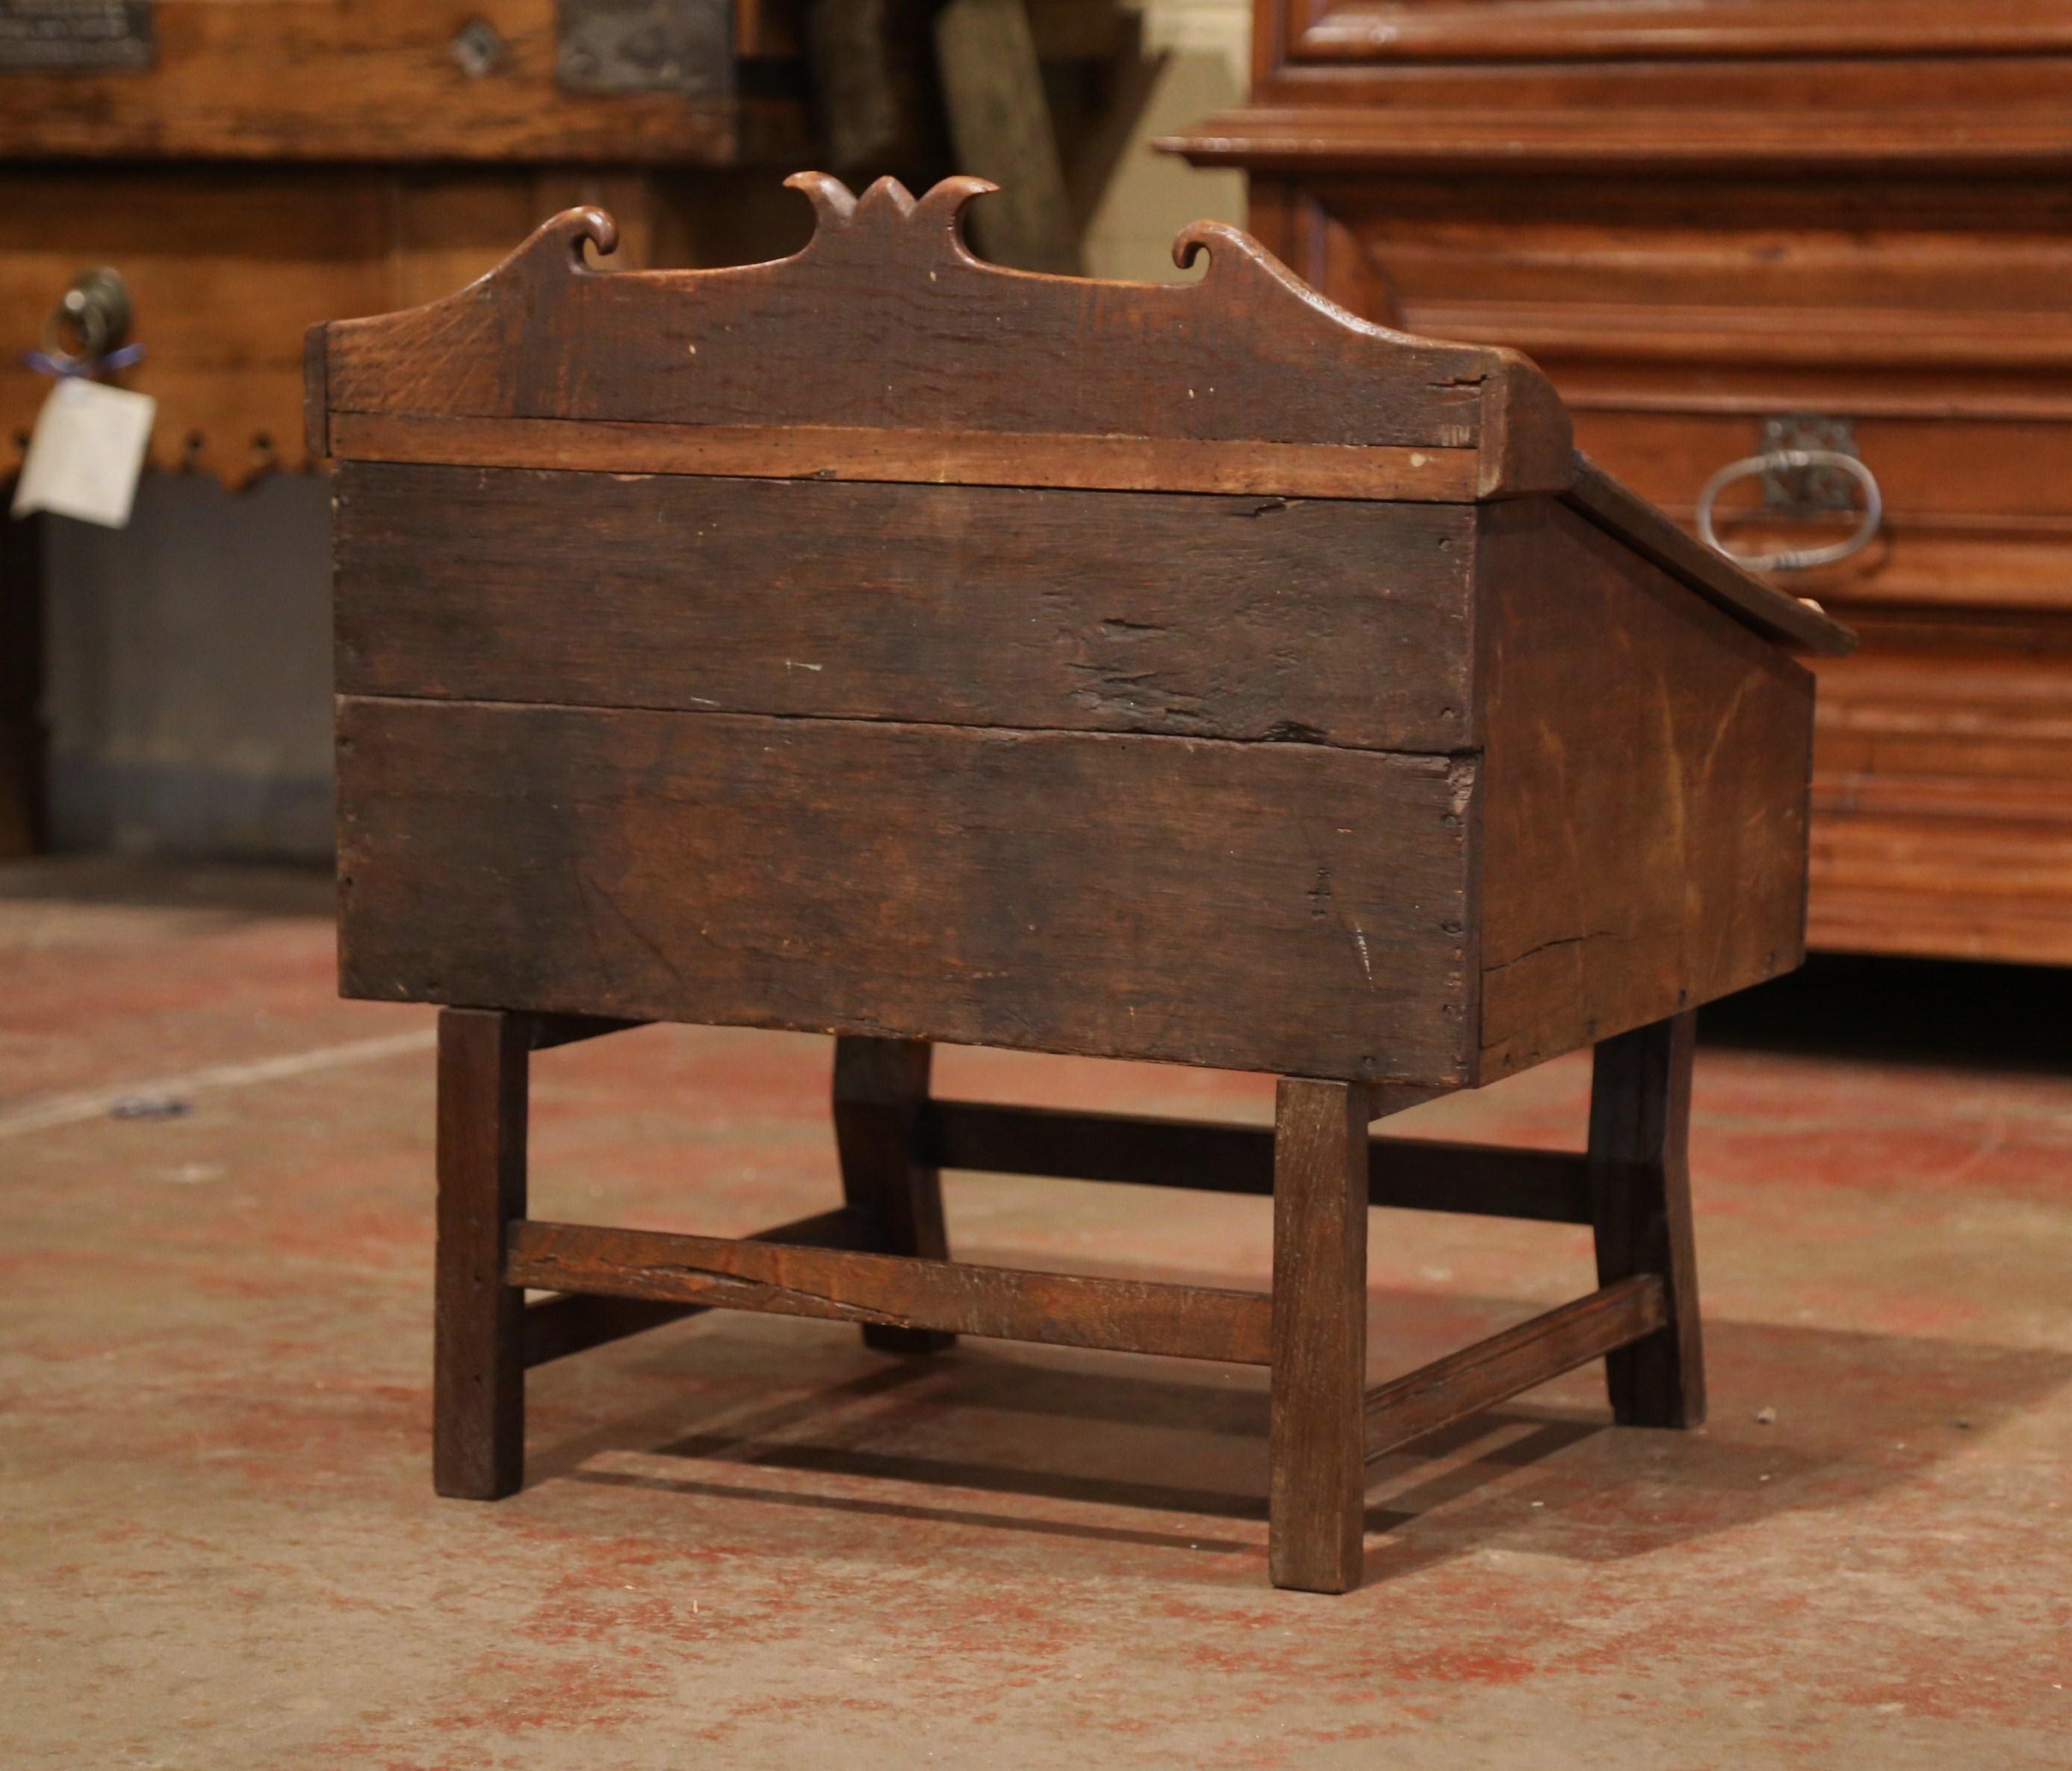 18th Century French Carved Walnut Desk on Legs with Slant Top and Inside Storage For Sale 4